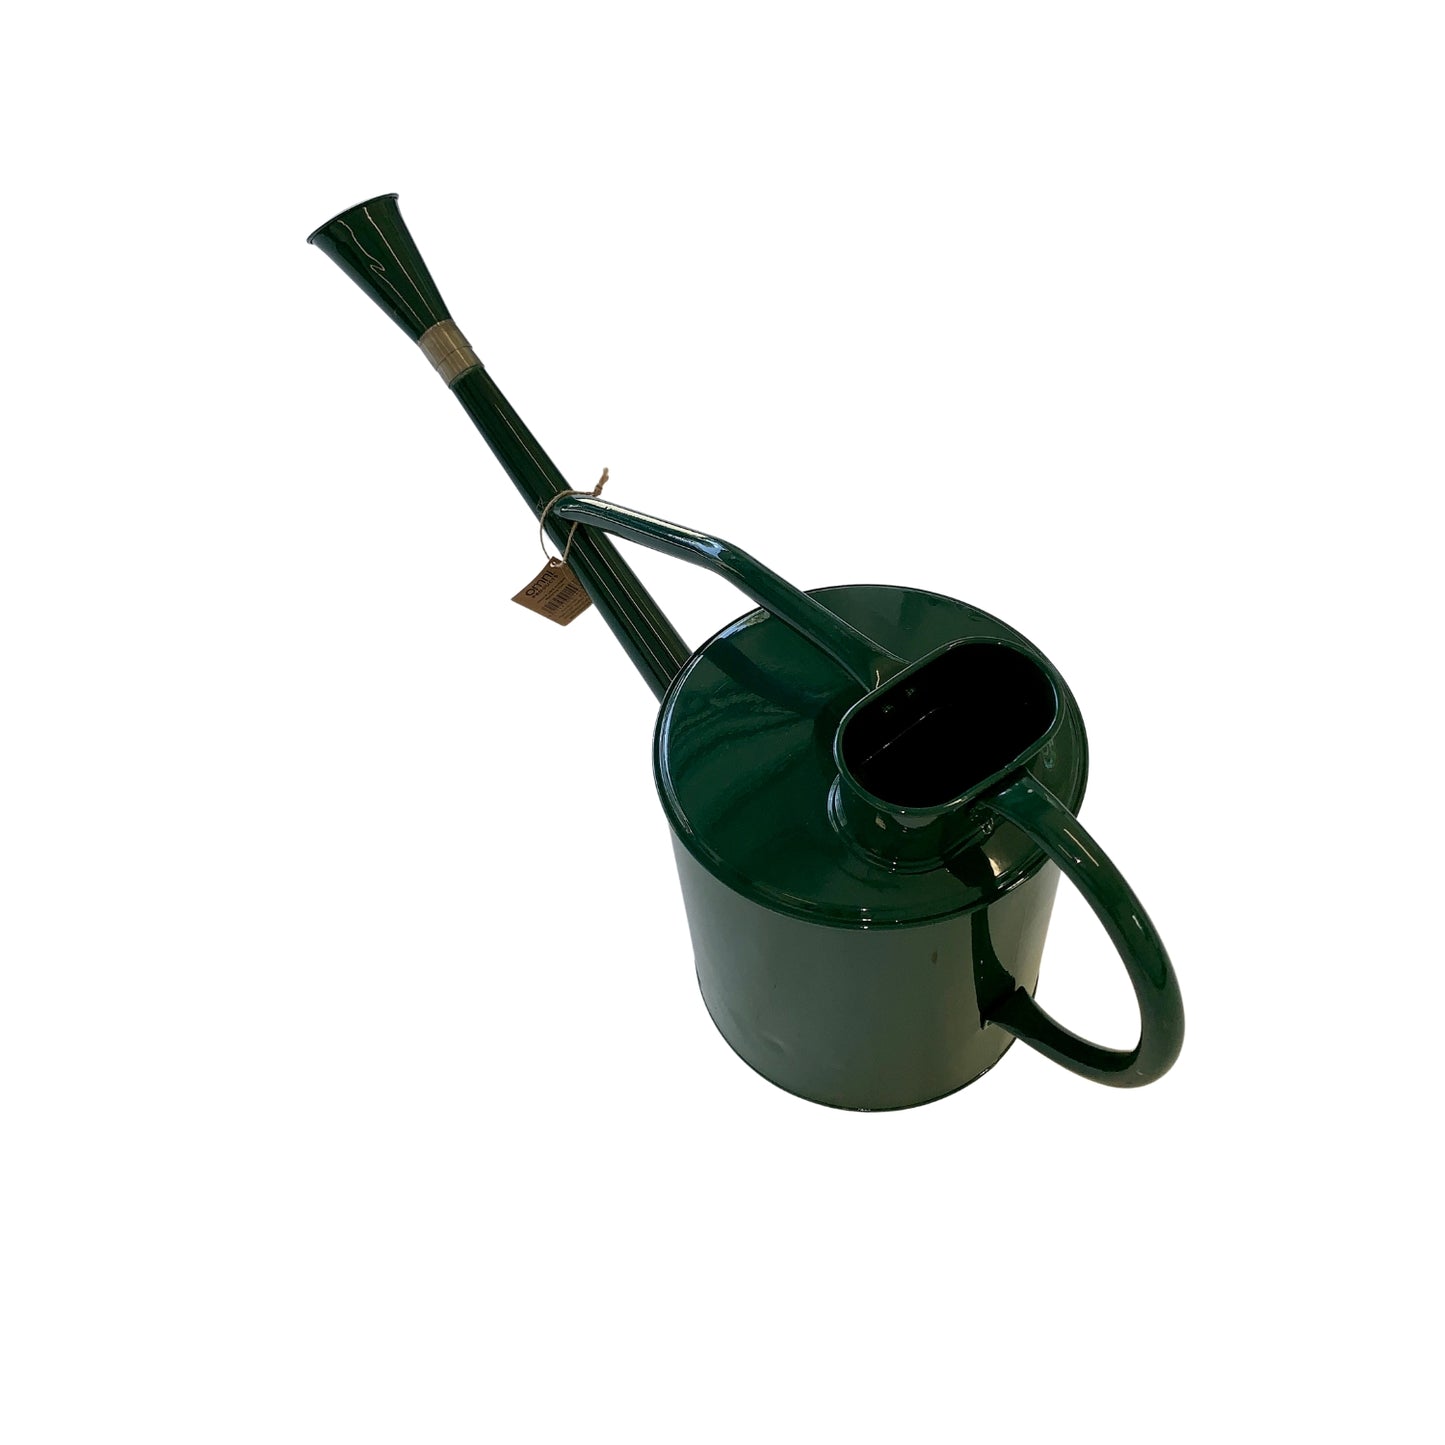 OMNI 9 LITRE ANTIQUE WATERING CAN - WC9